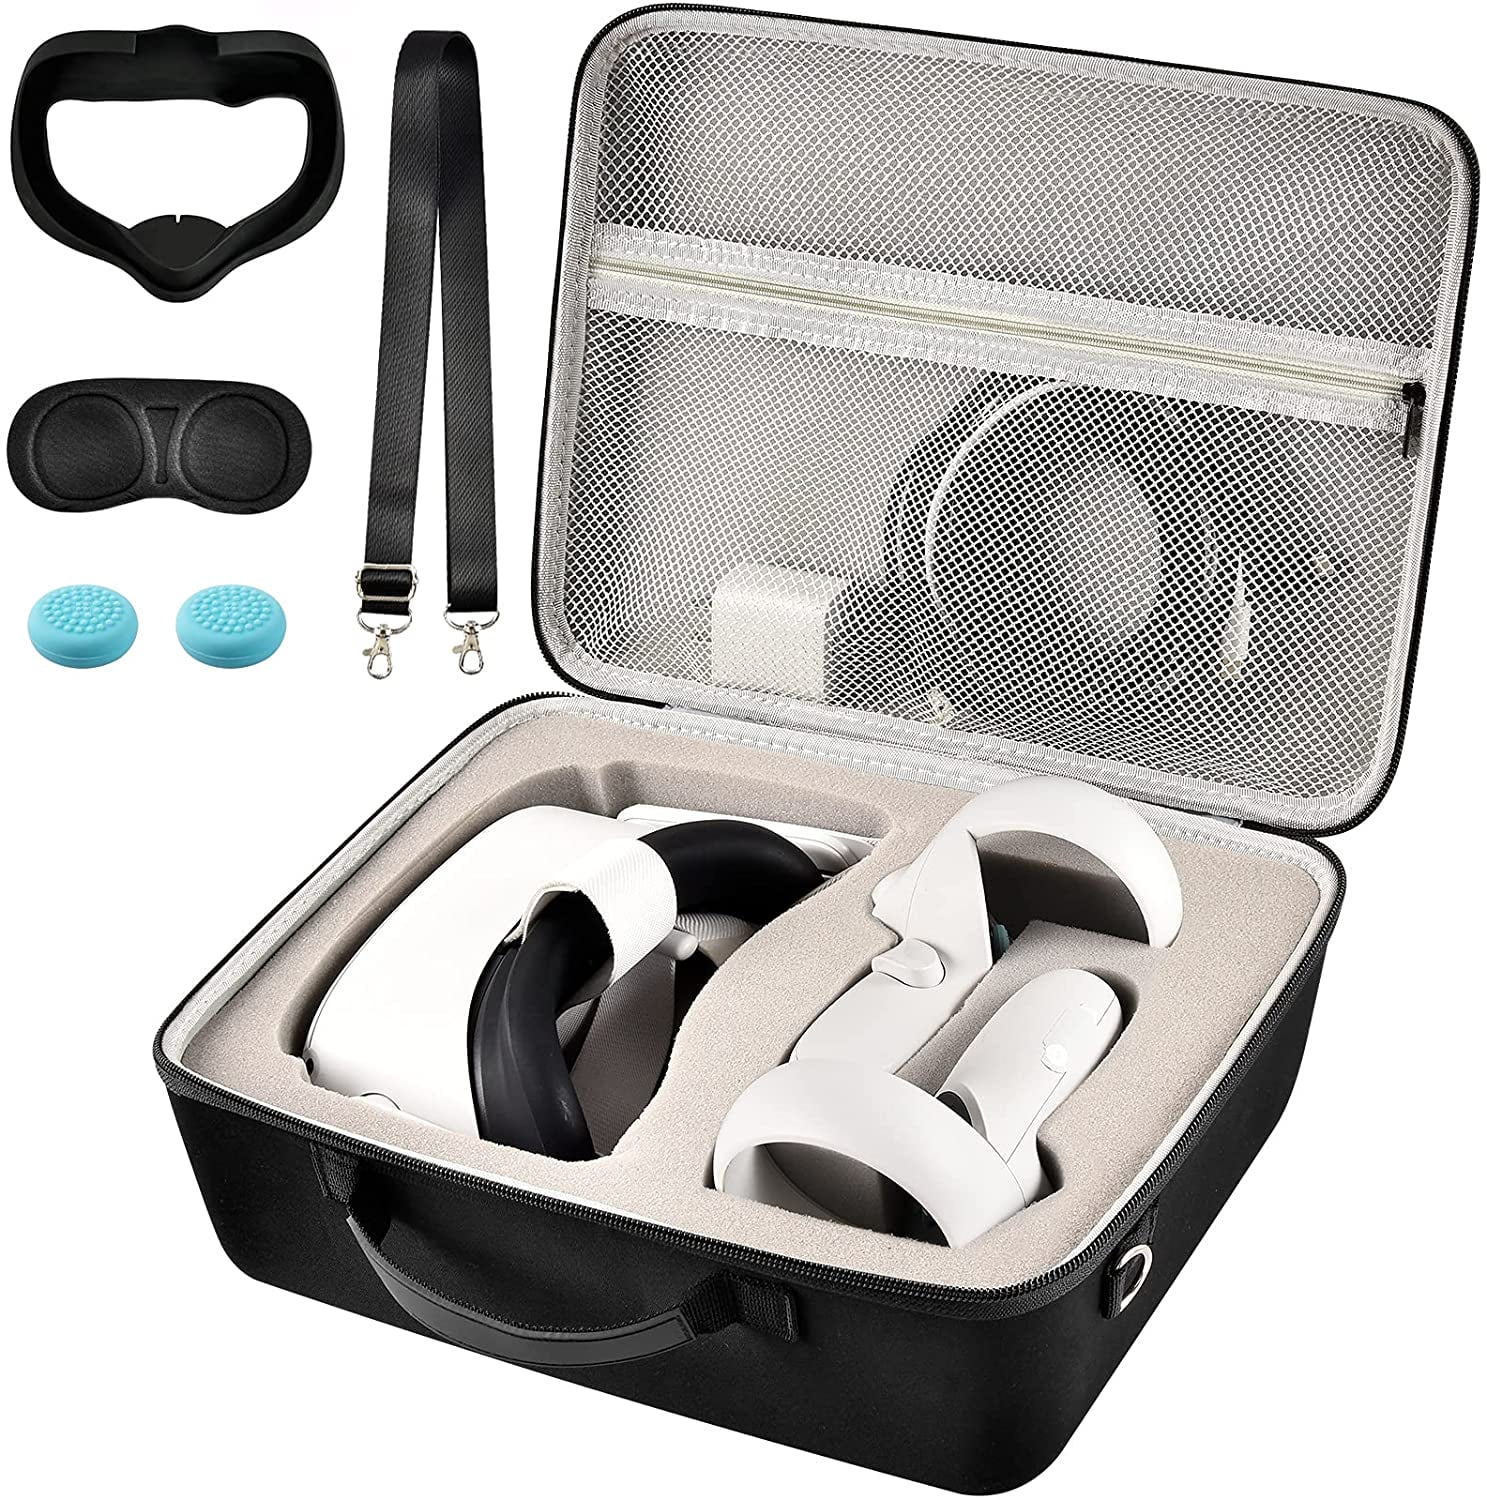 Shredded nødvendig abstrakt Case for Oculus Quest 2 VR Headset and Controllers, with Face Cover and  Lens Protector for Travel Protection– Grey - Walmart.com